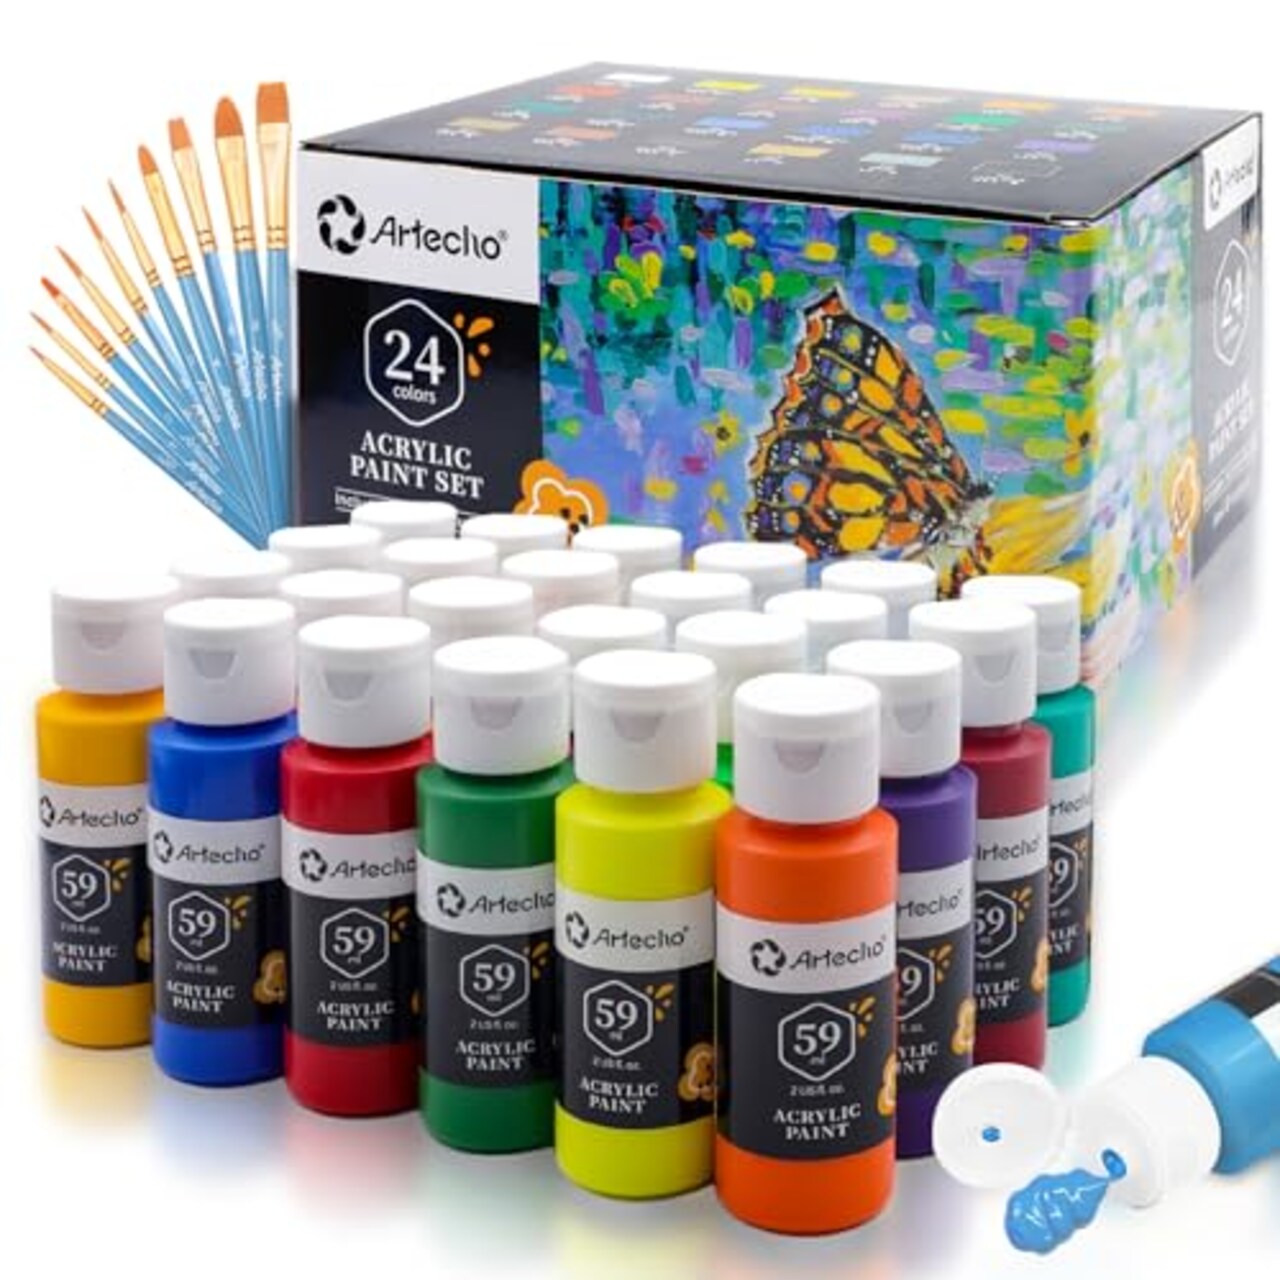 Artecho Acrylic Paint Set 24 Colors 2oz/59ml with 10 Paintbrushes, Art  Craft Paint for Art Supplies, Paint for Canvas, Rocks, Wood, Fabric, Non  Toxic Paint for Artists, Students, Beginners and Adults